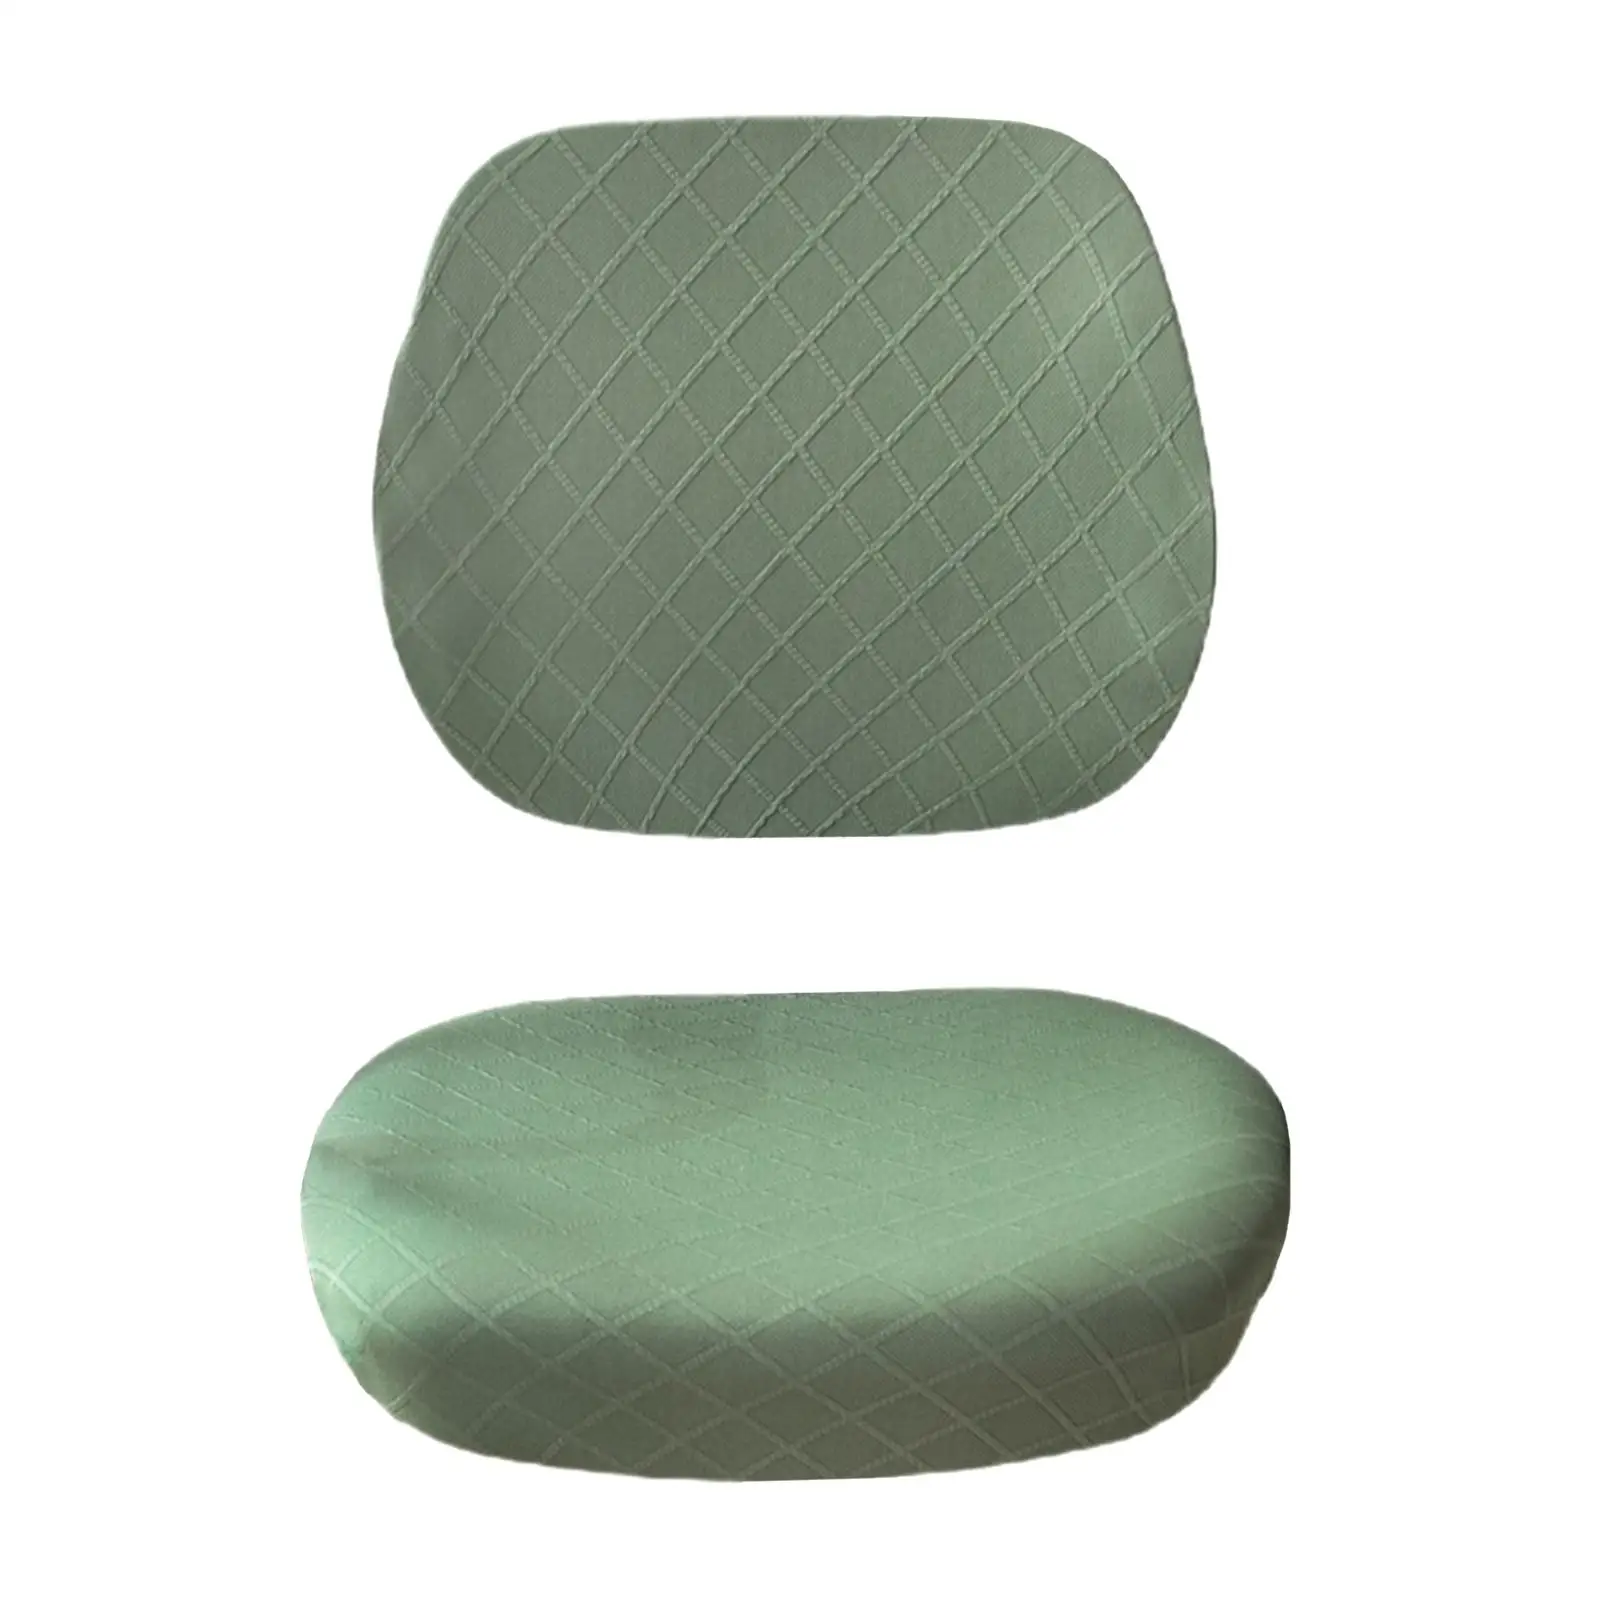 Swivel Rotating Chair Seat Cover Slipcover Stretch Solid Color Dustproof Computer Chair Cover for Swivel Chair Computer Chair